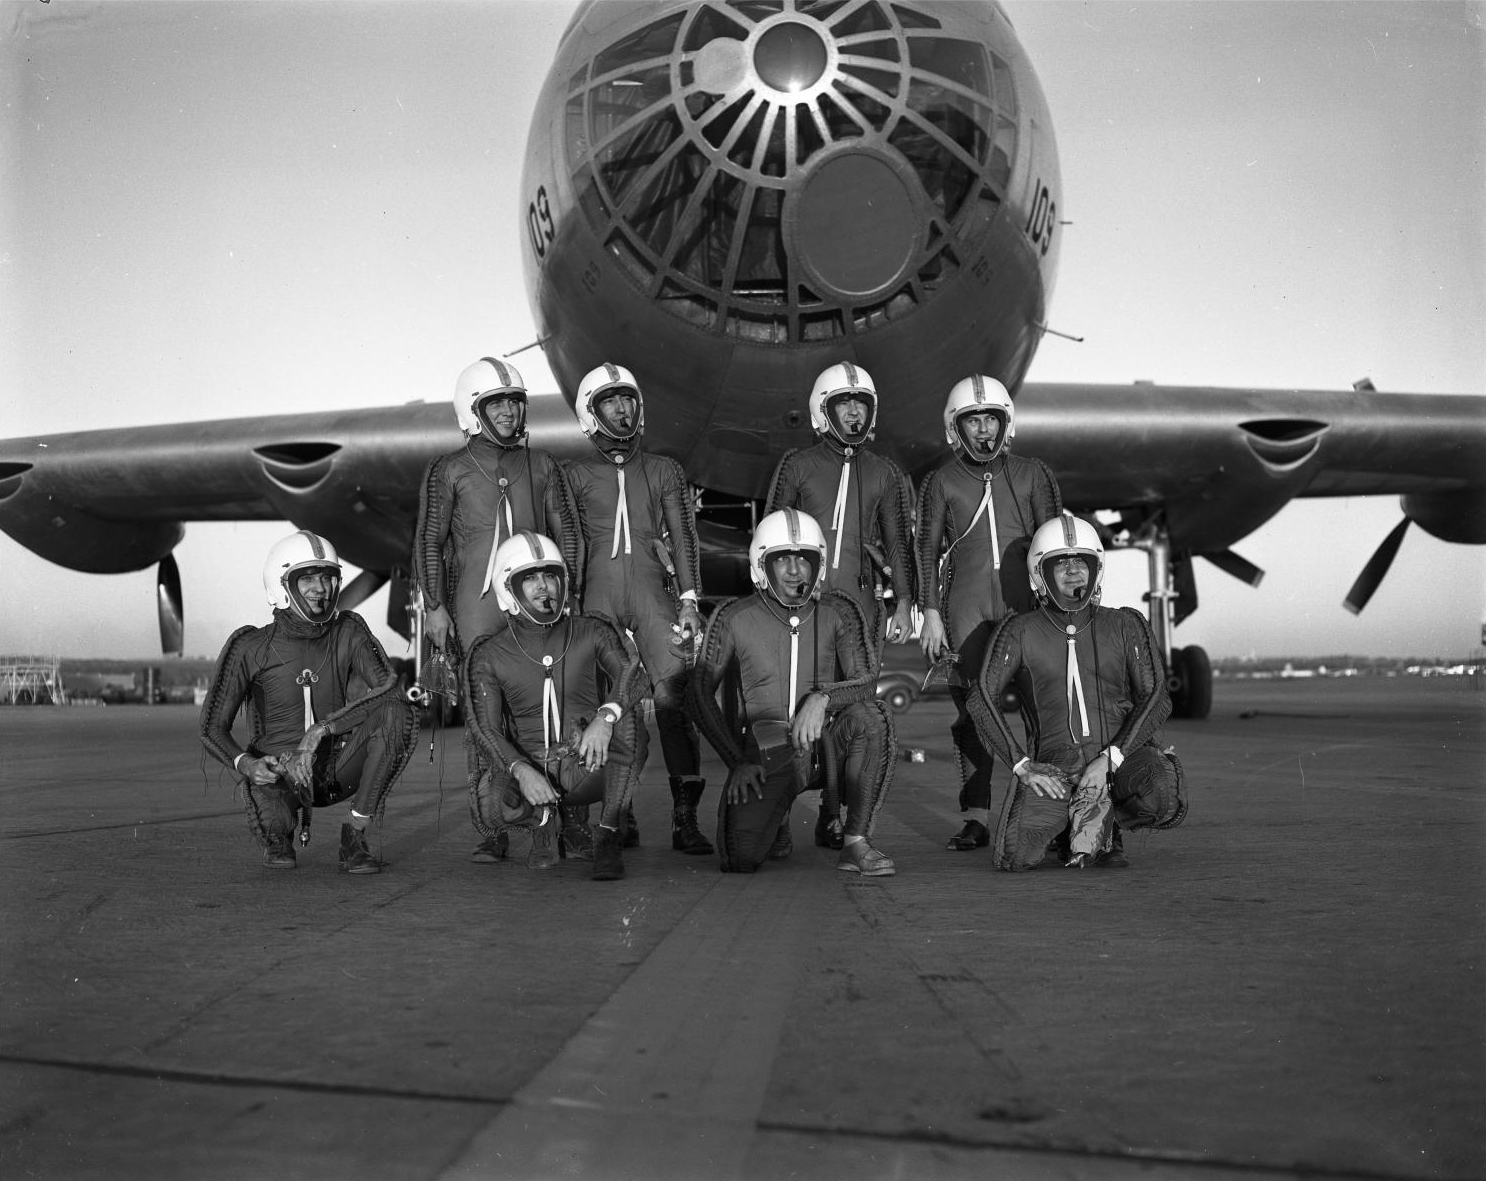 Crewmebers pose in front of a B-36F, wearing capstan-type partial pressure suites for protection at high altitude. Front (L-R): G.L. Whiting, B.L. Woods, I.G. Hanten, and R.L. D’Abadie. Back (L-R):A.S. Witchell, J.D. McEachern, J.G. Parker and R. D. Norvell. (Jet Pilot Overseas)